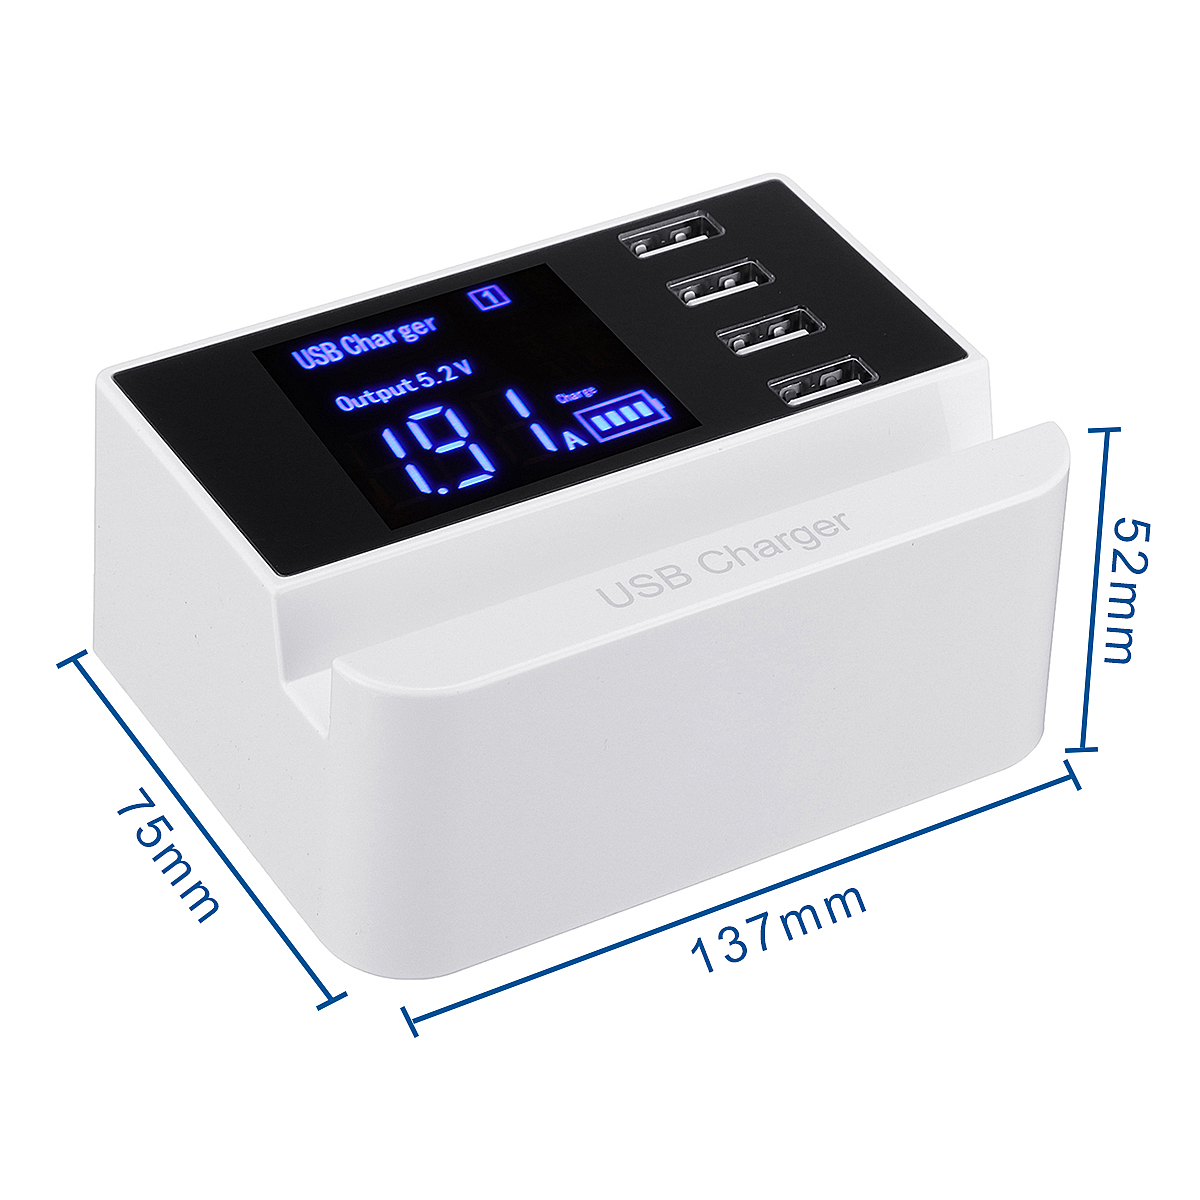 LCD-Display-19-Inch-USB-Charger-Power-Adapter-Desktop-Charging-Station-Phone-Charger-Smart-IC-techno-1235943-13